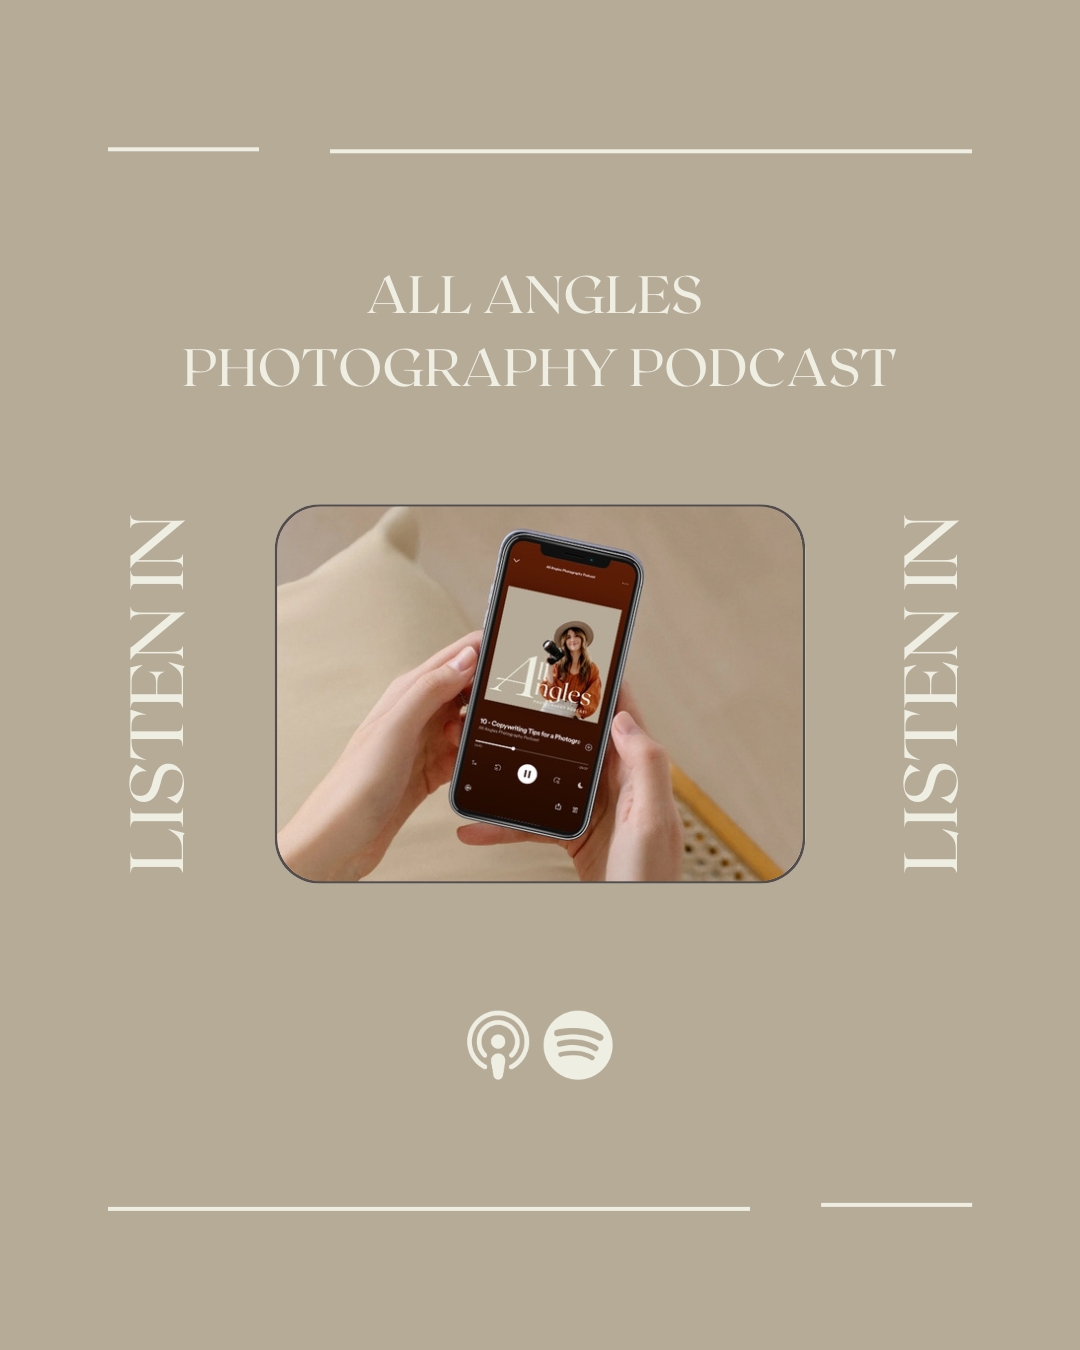 All Angles Photography Podcast, episode 17 is all about wedding photography gear.